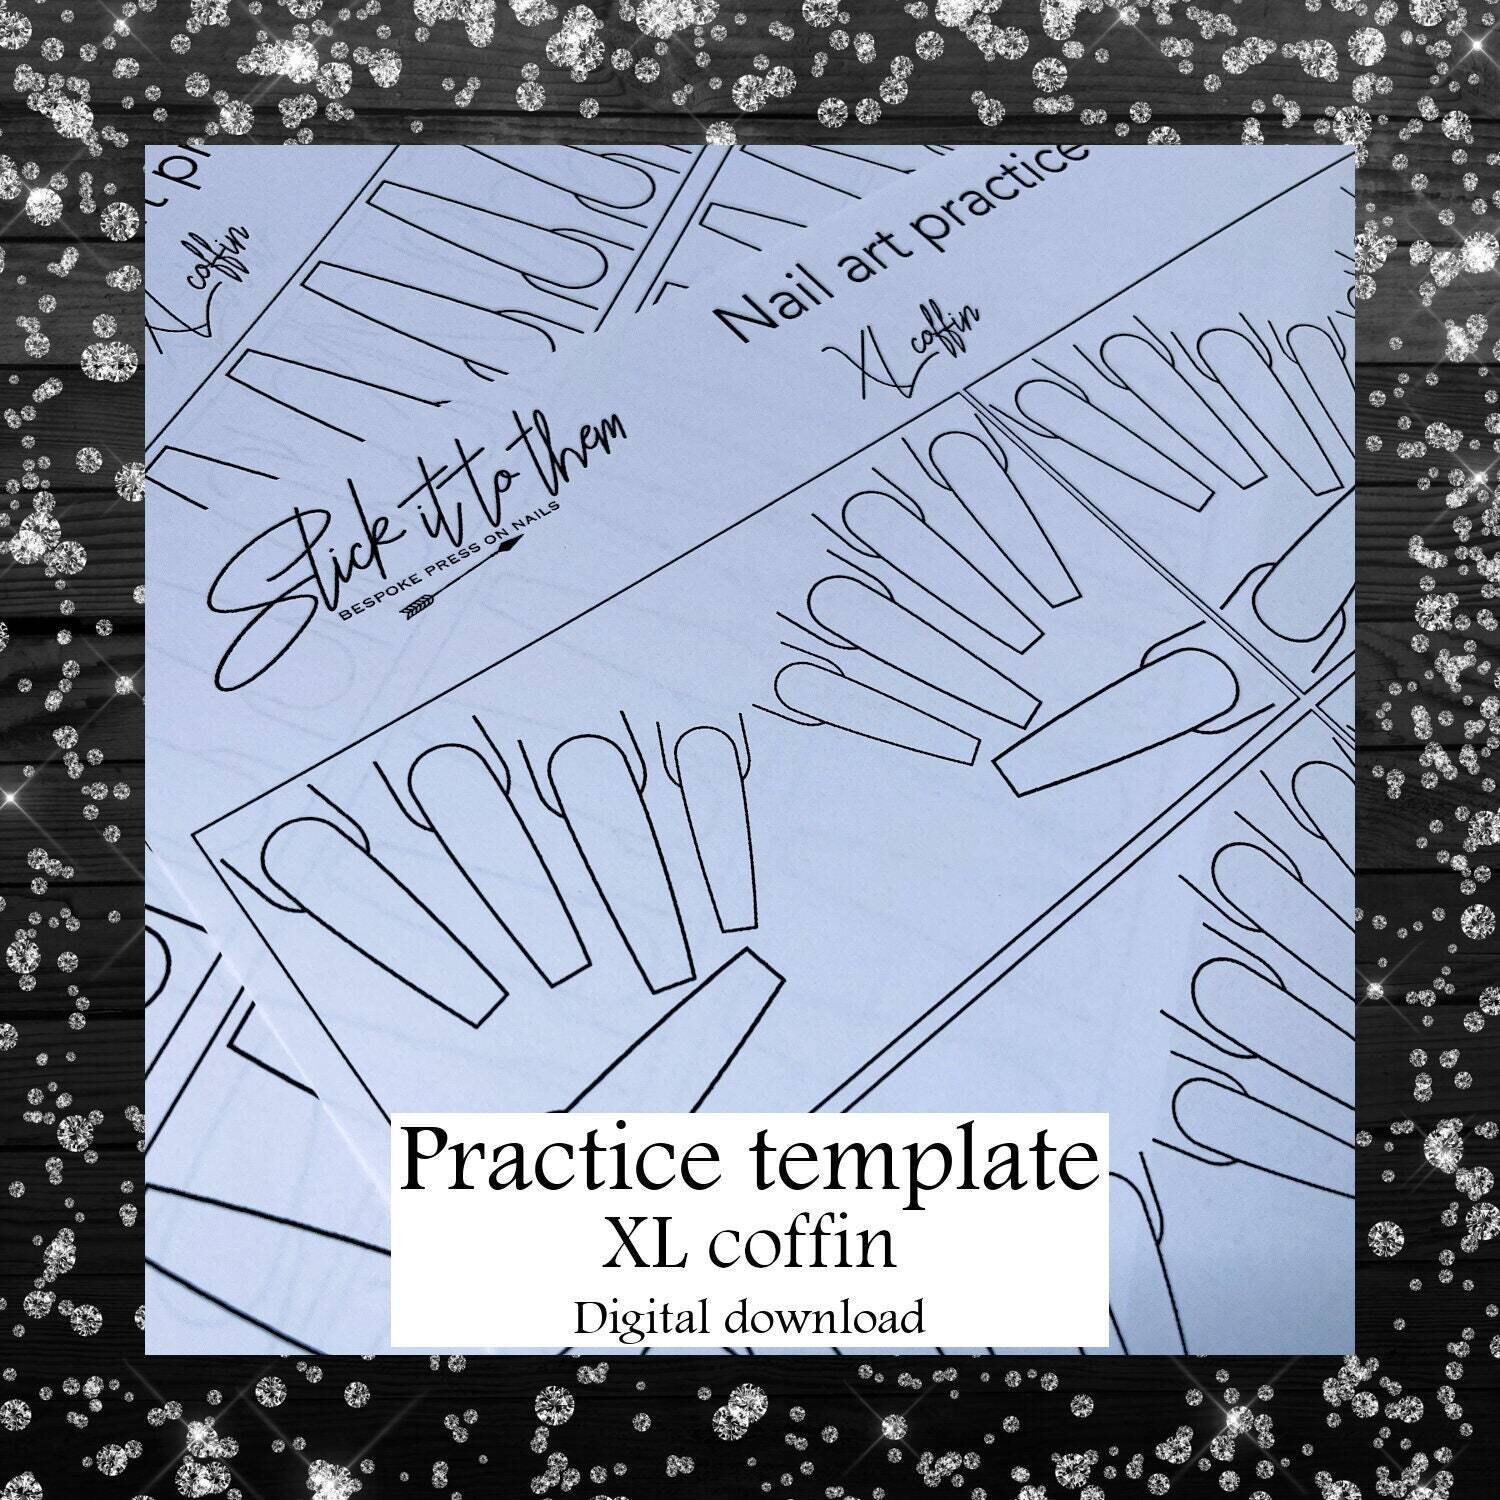 Practice template XL COFFIN - DIGITAL DOWNLOAD - Print your own nail art practice sheets!